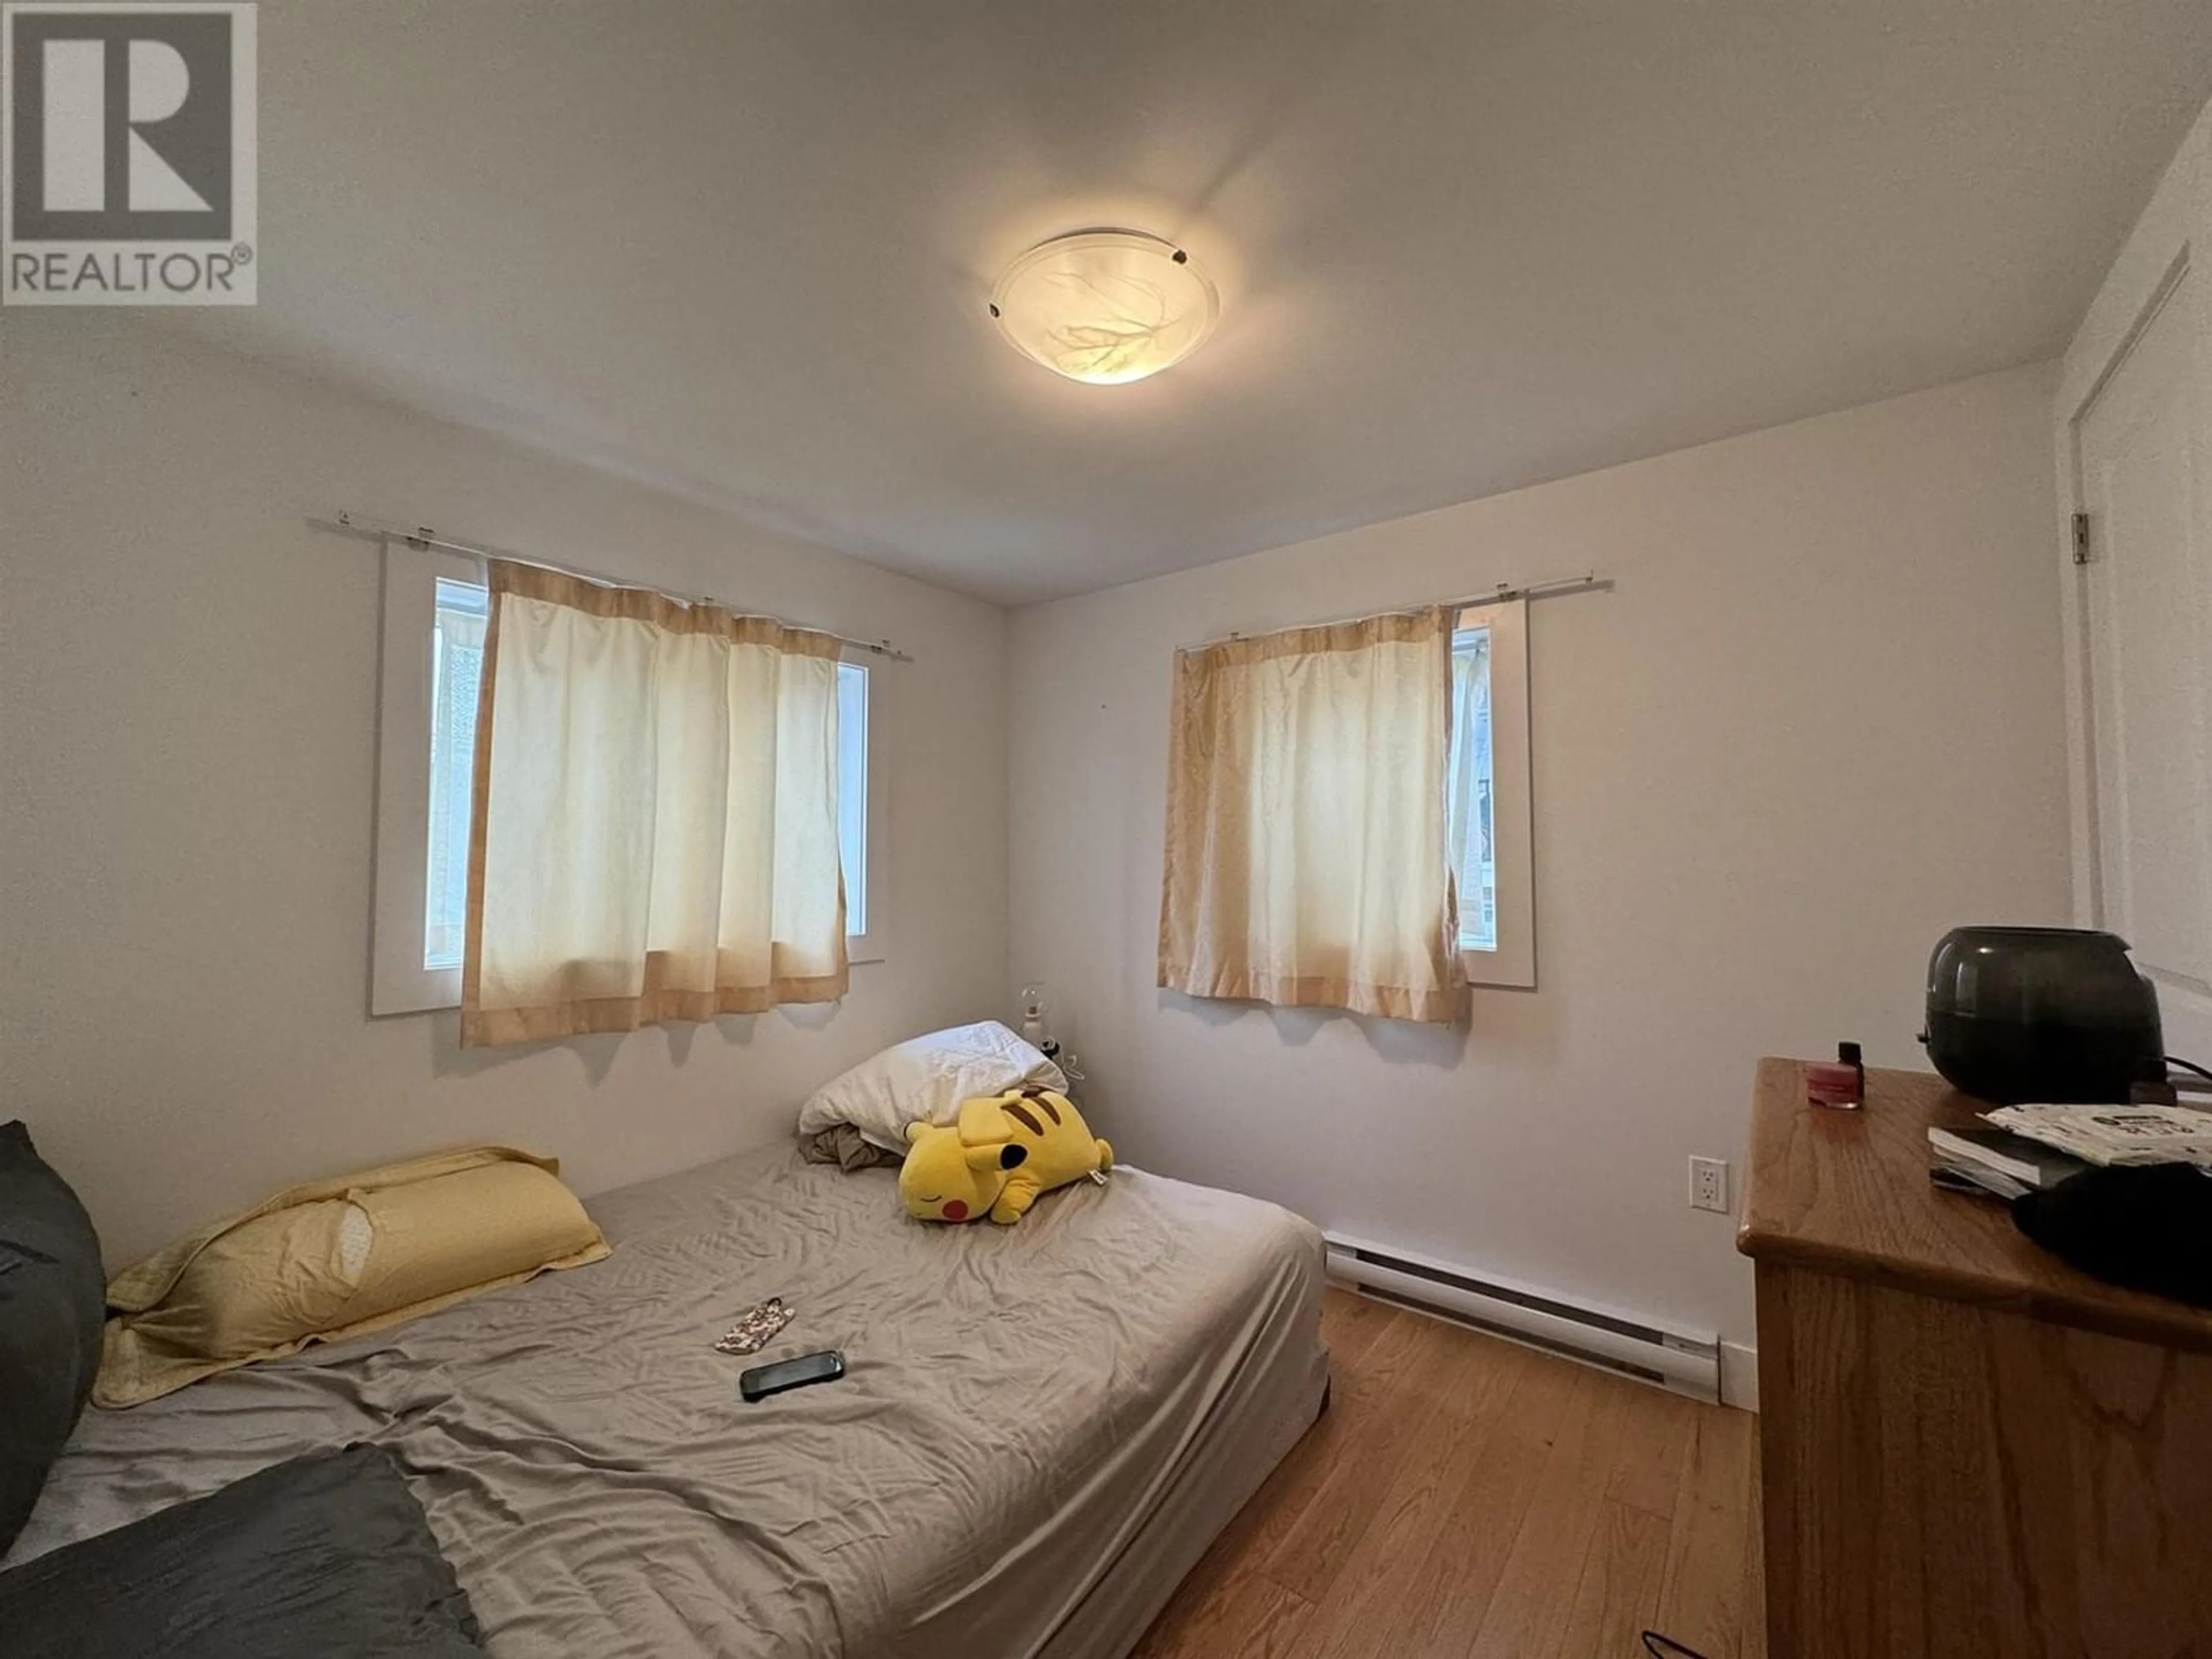 A pic of a room for 1475 RENFREW STREET, Vancouver British Columbia V5K4C5